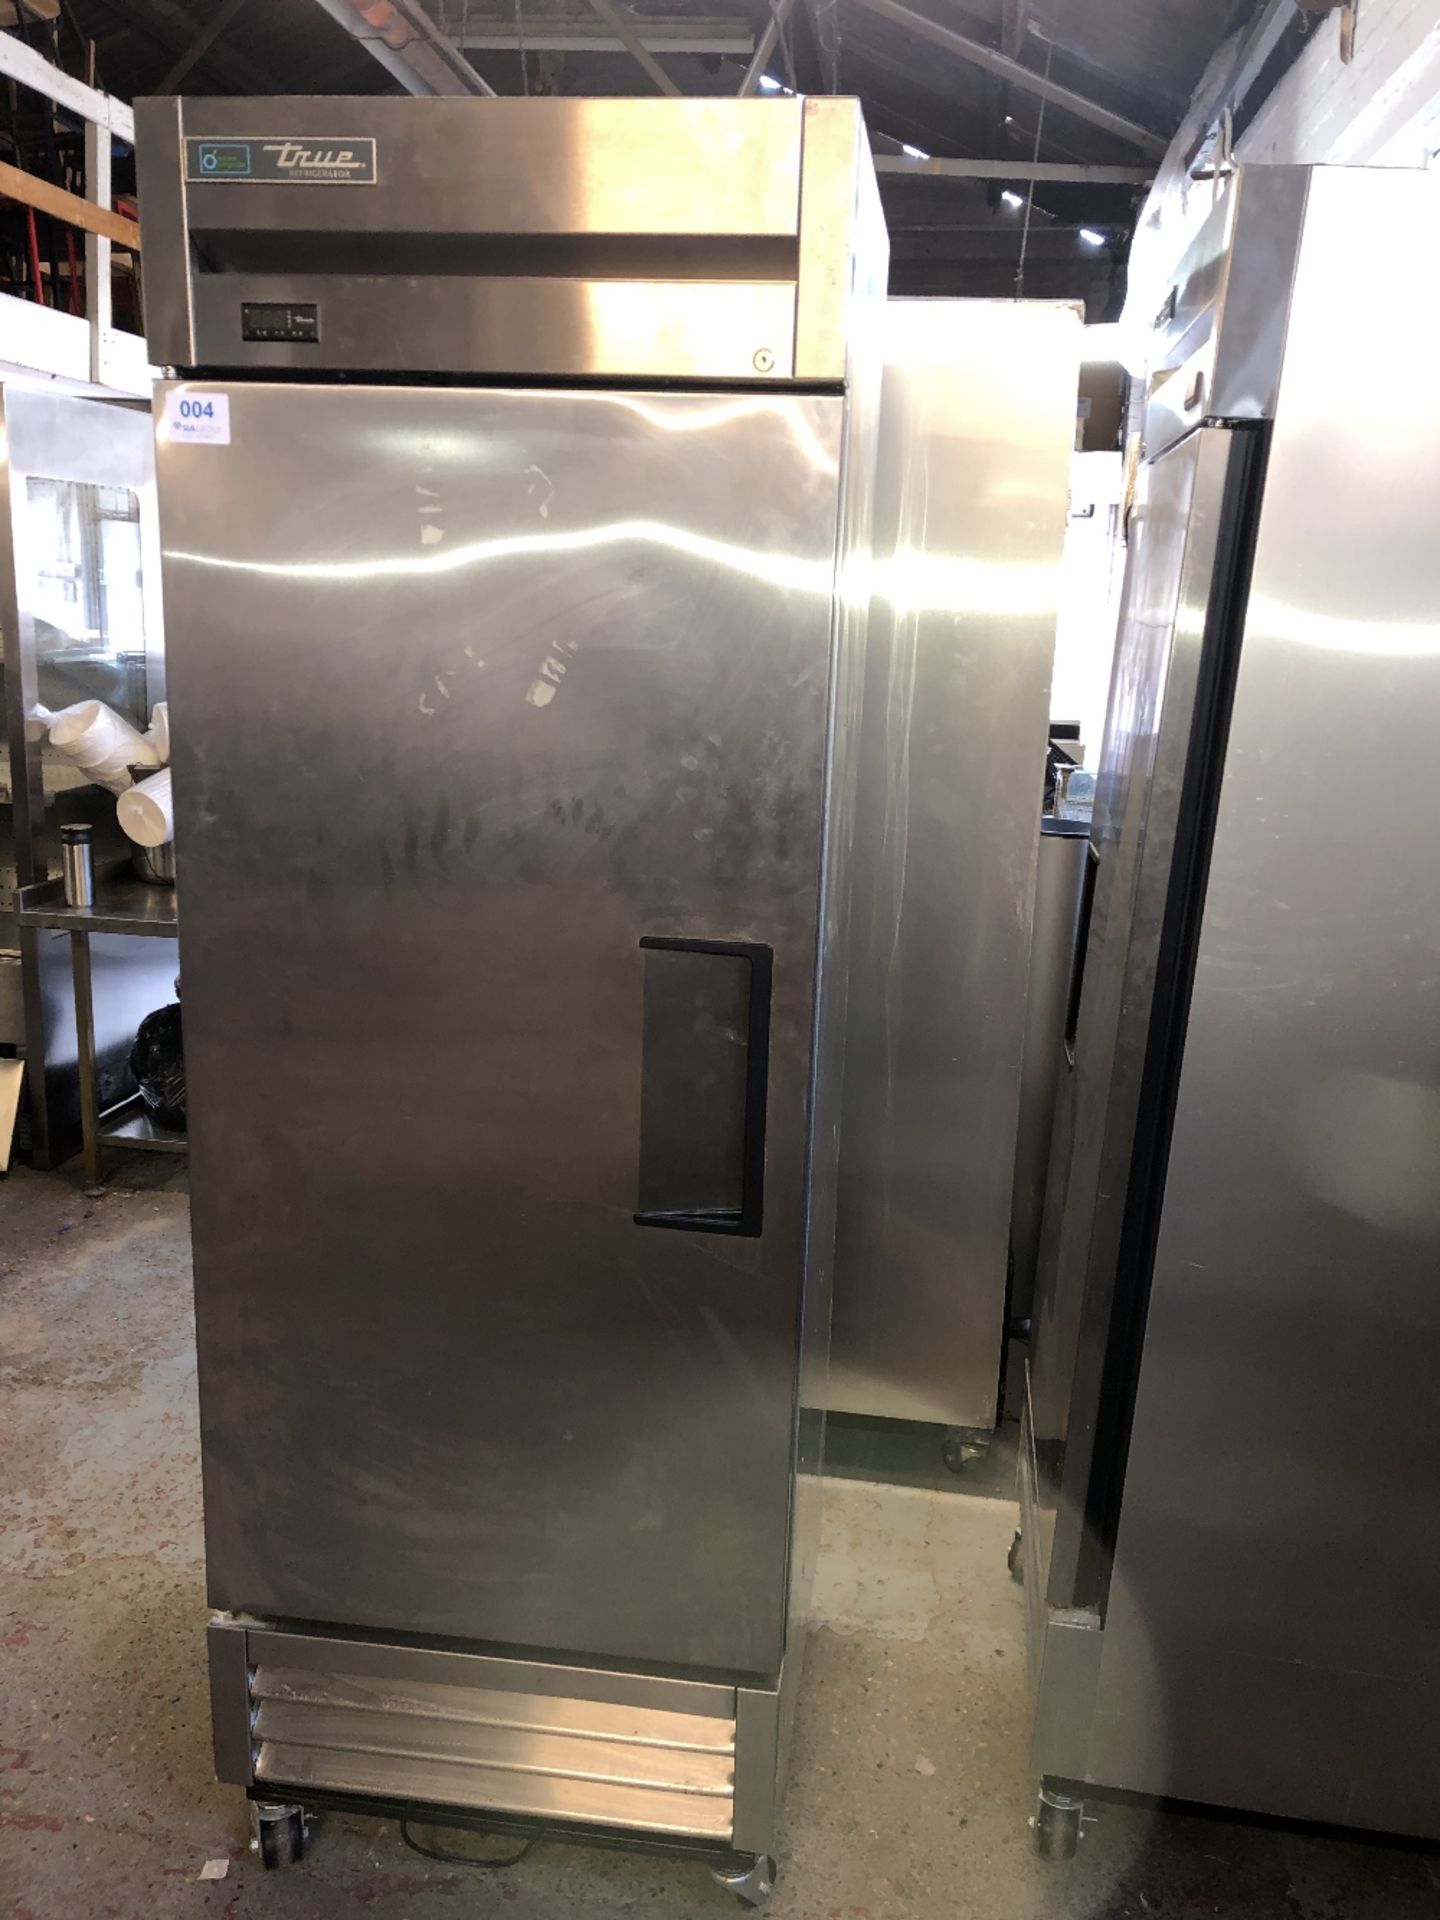 True Refrigeration T-19E-HC Upright Commercial Stainless Steel Fridge - Image 2 of 4